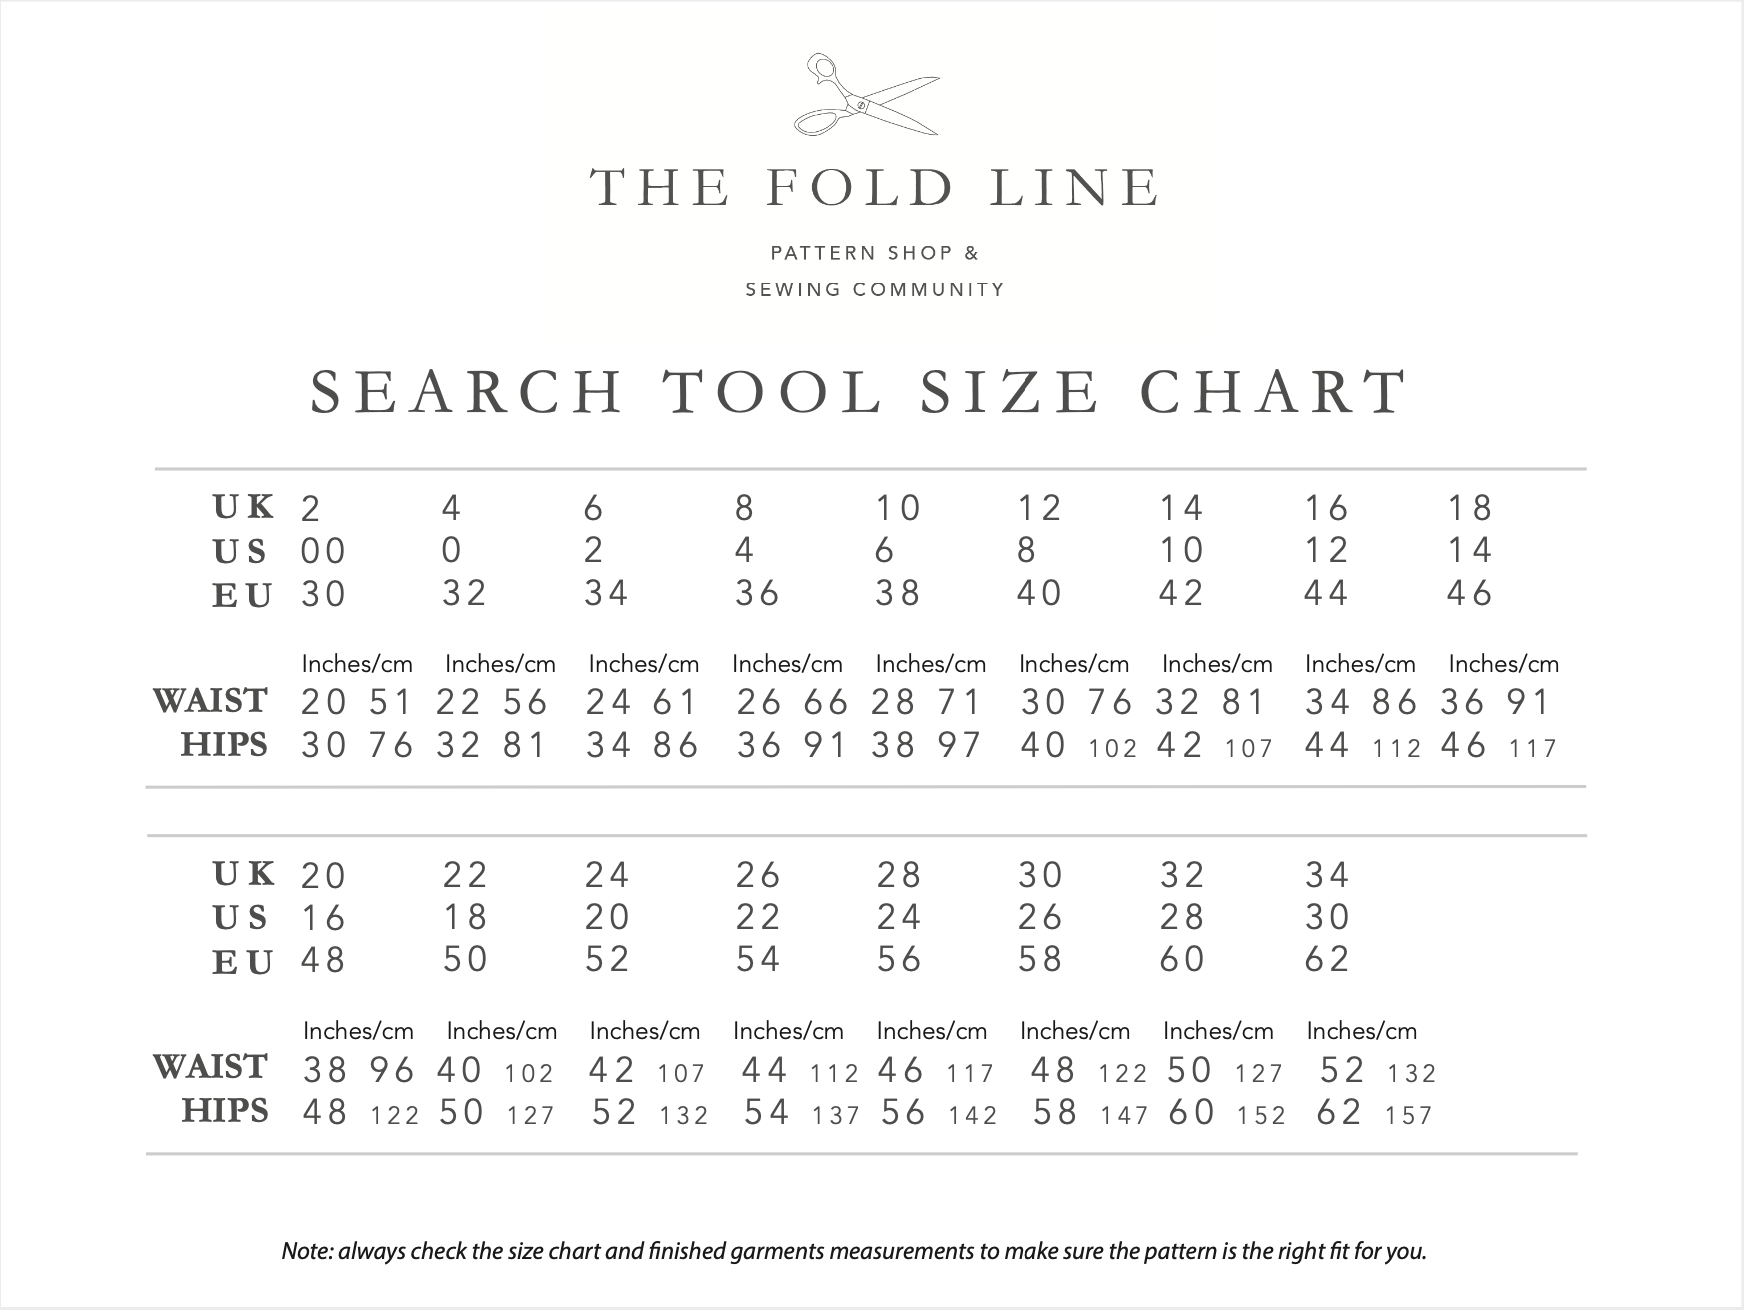 https://thefoldline.com/wp-content/uploads/2020/04/The-Fold-Line-Search-Tool-Sewing-Pattern-Size-chart.png